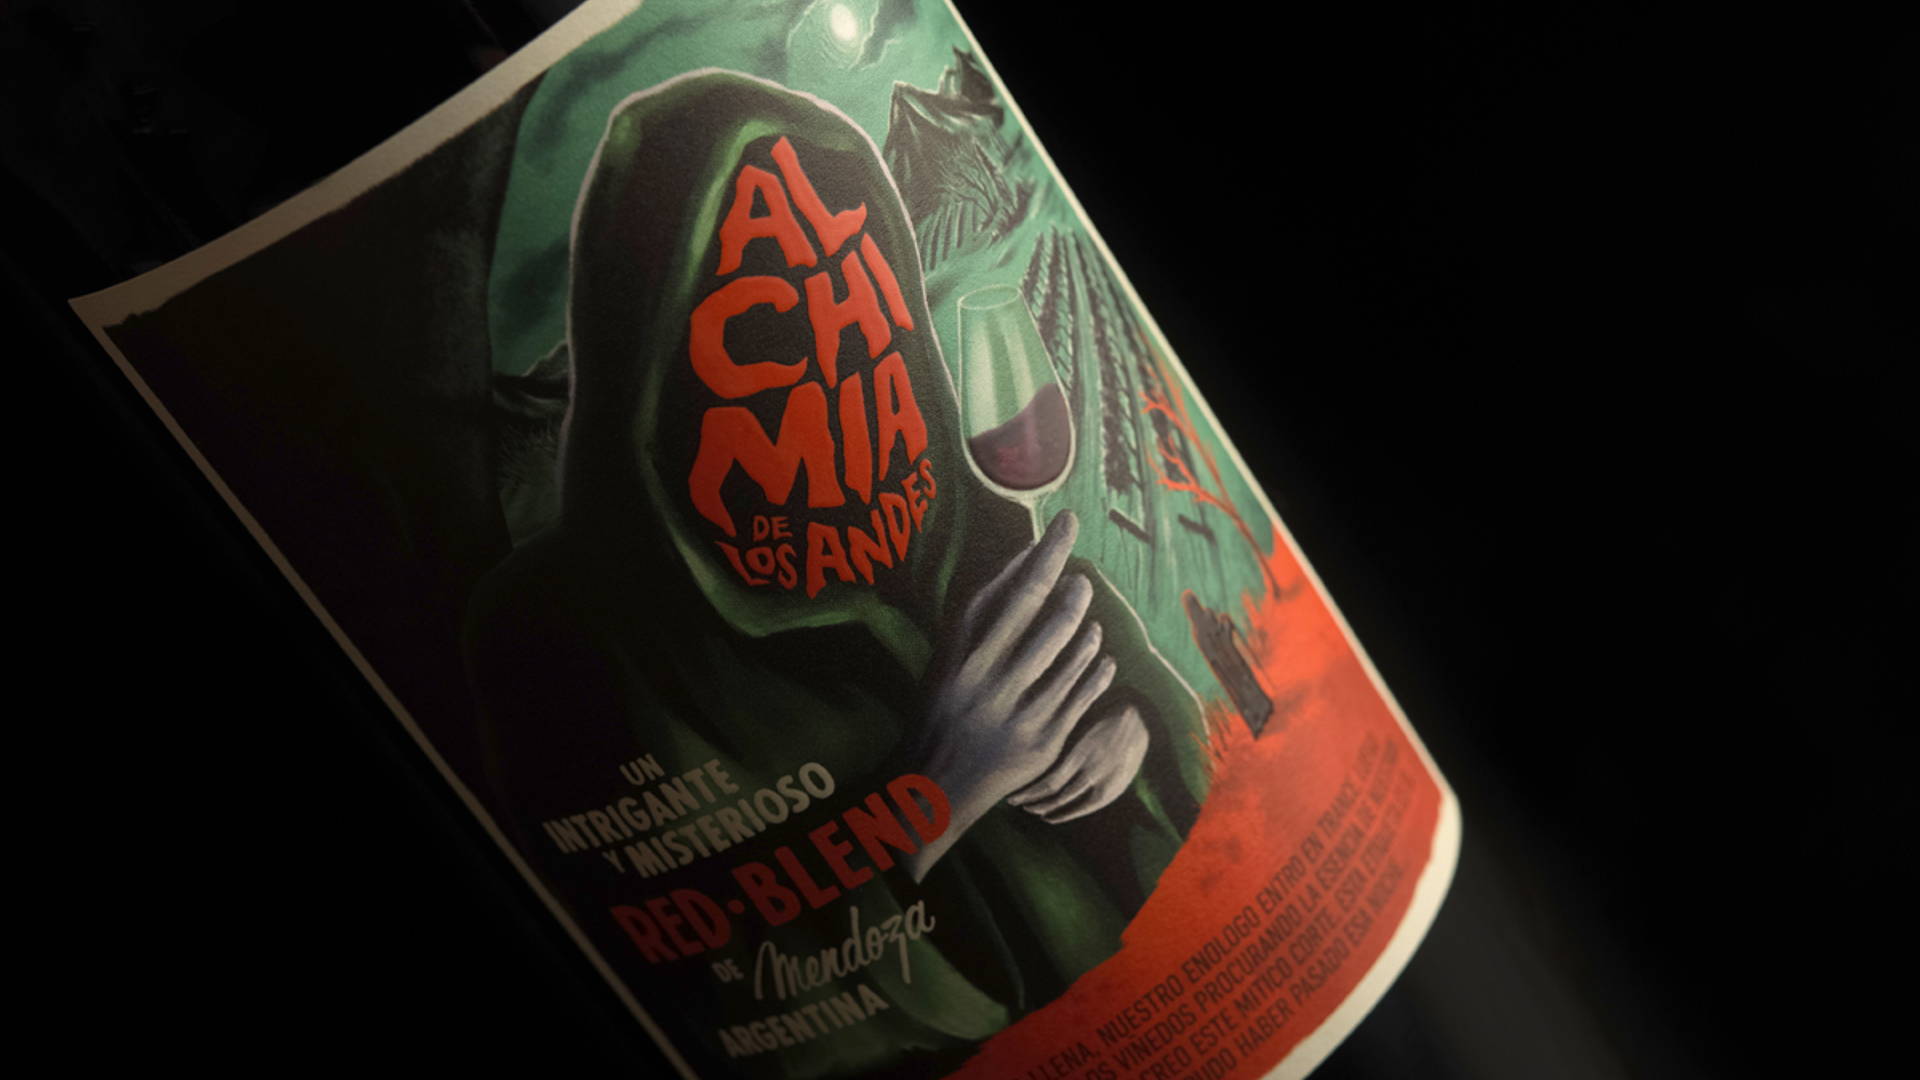 Featured image for This Wine Packaging Takes Inspiration From A Vintage Horror Movie Poster